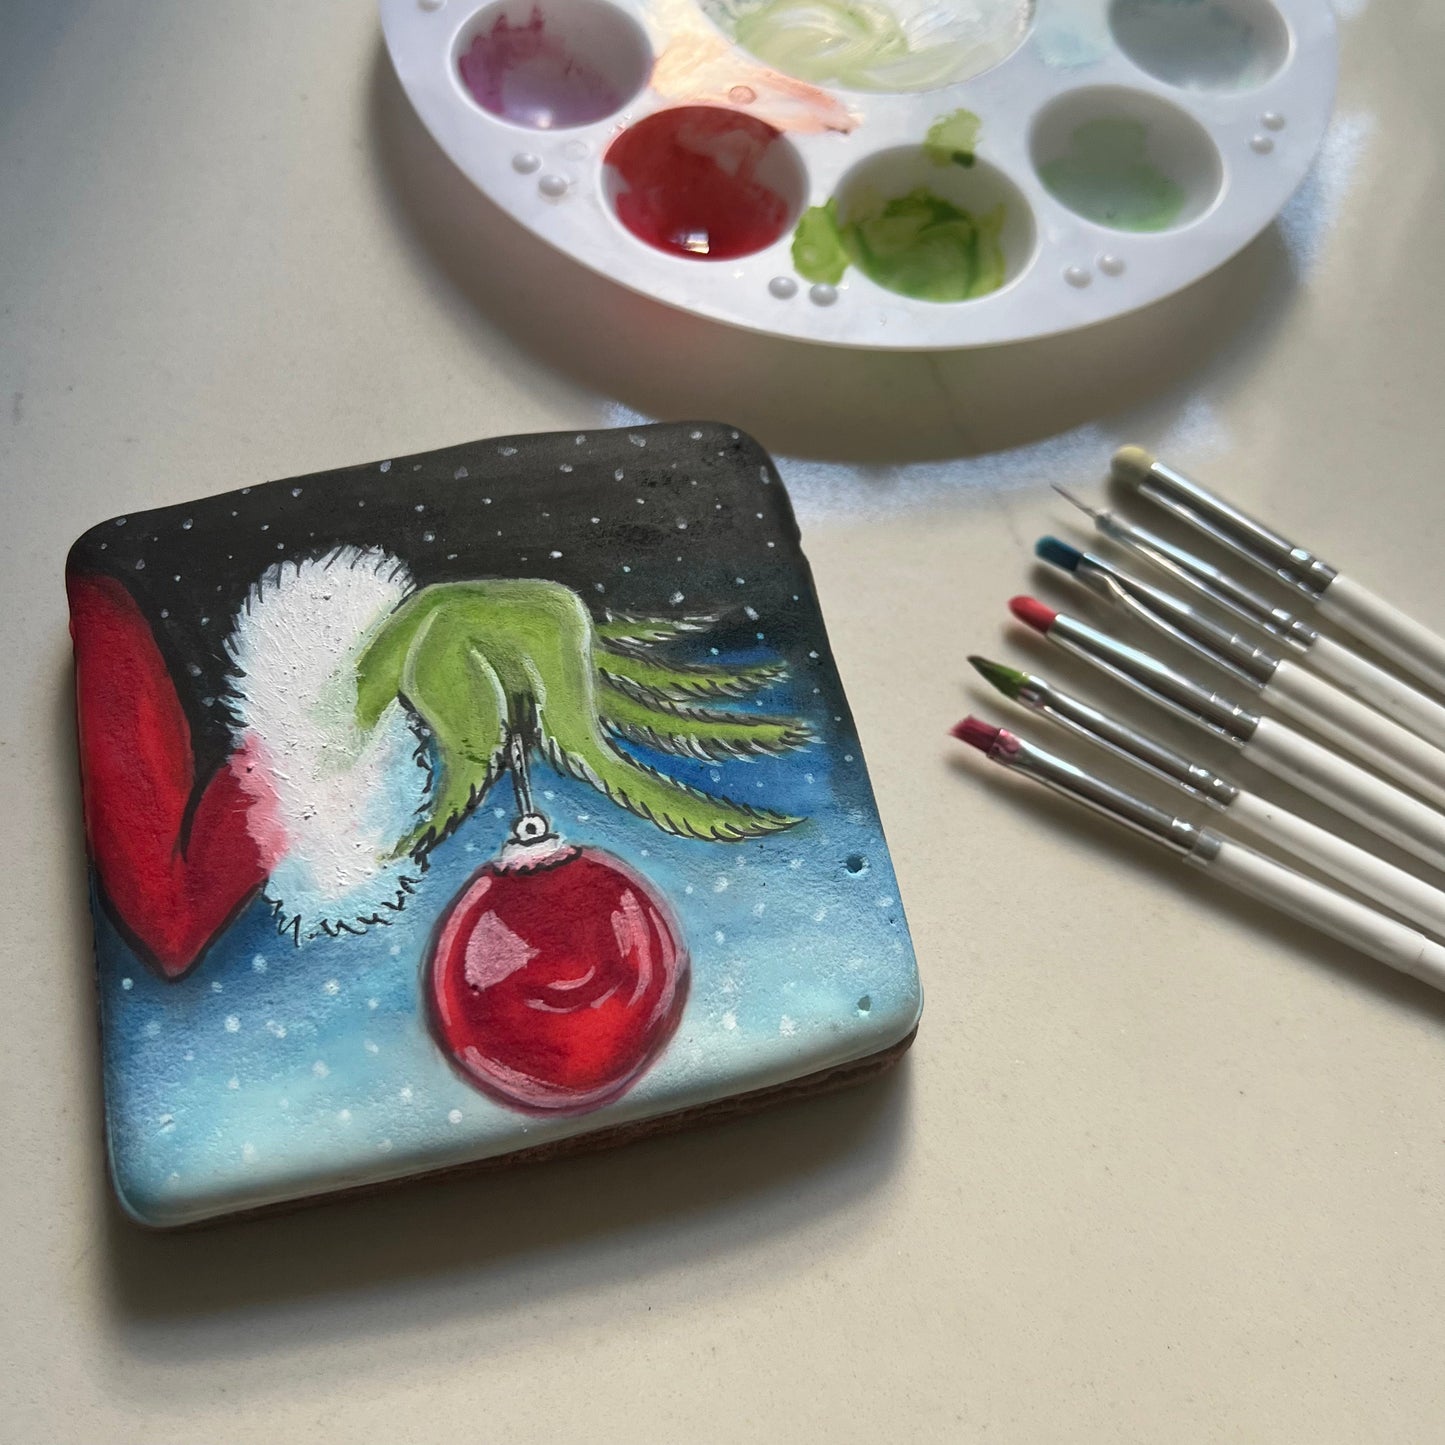 "The Mean Green One" Cookie Painting Class - (Houston, Texas) DEC 18th